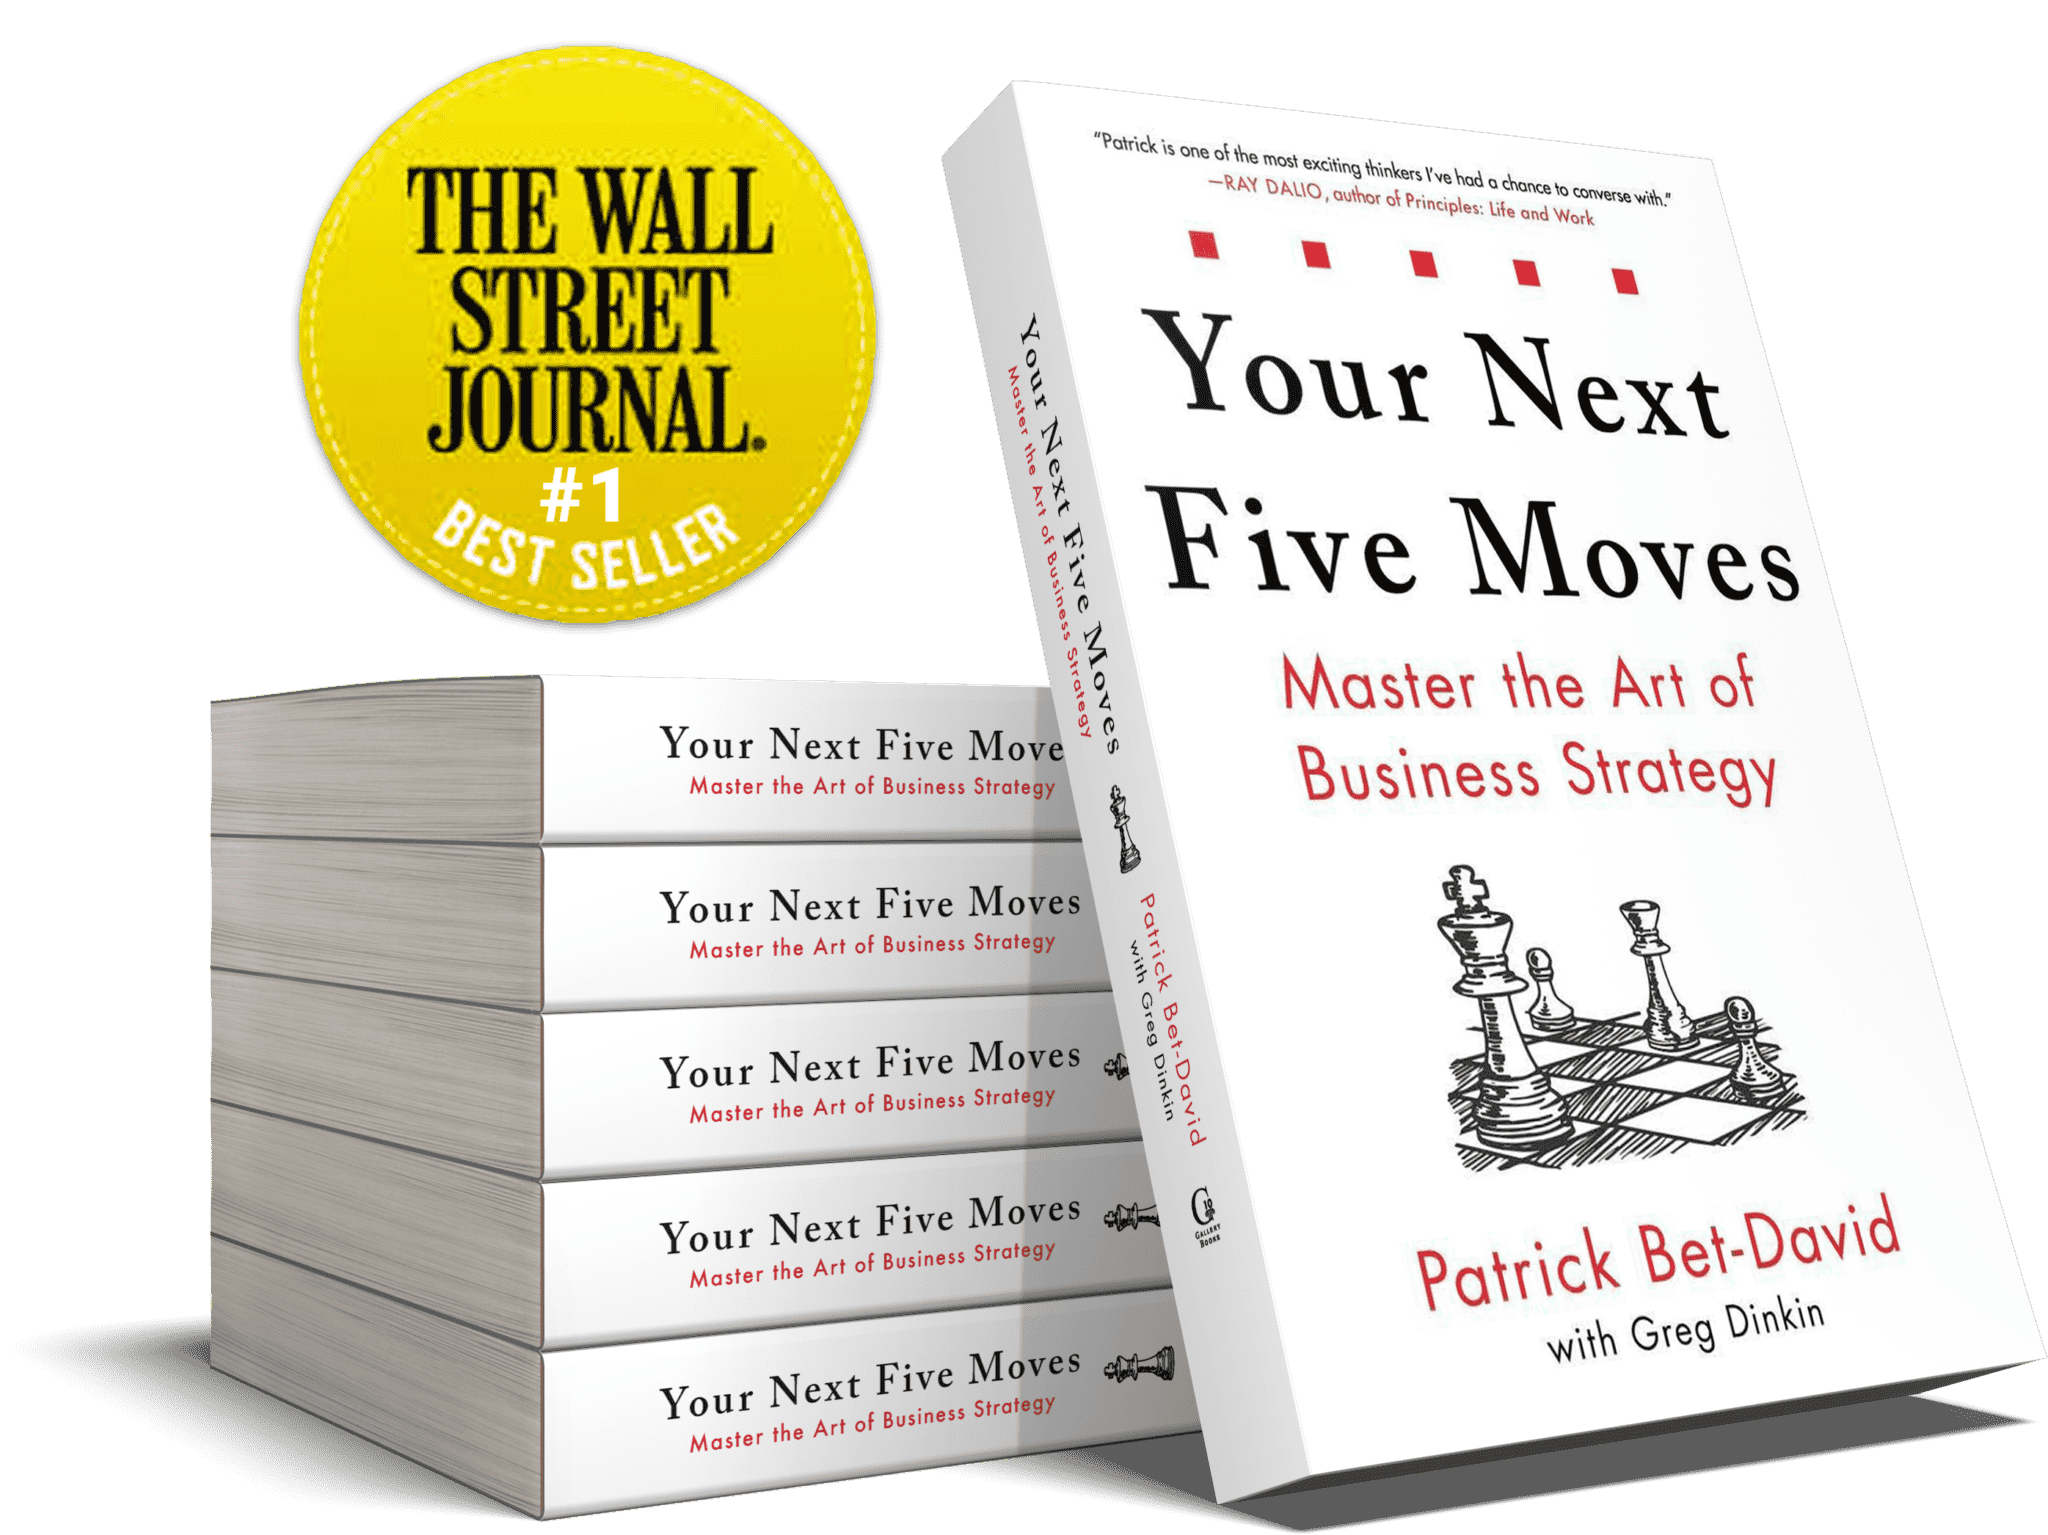 Book Summary - Your Next Five Moves (Patrick Bet-David)